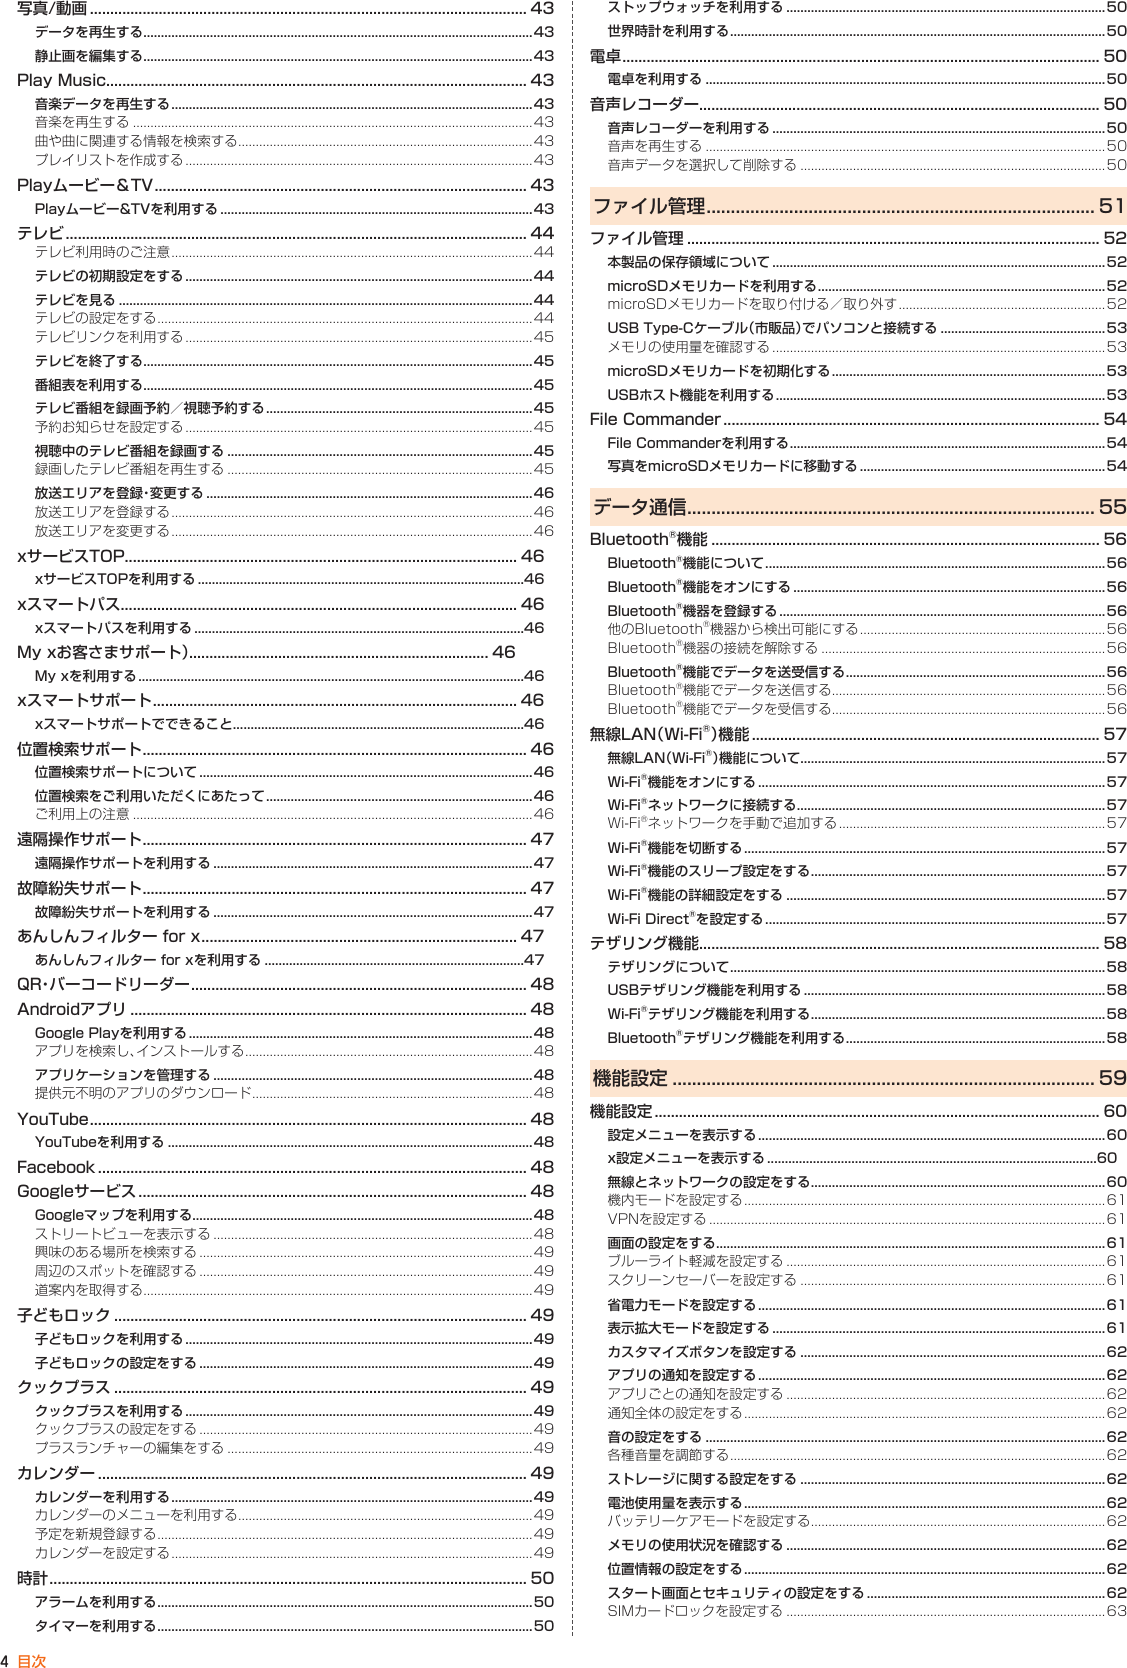 Page 5 of Kyocera FA85 Tablet User Manual 2